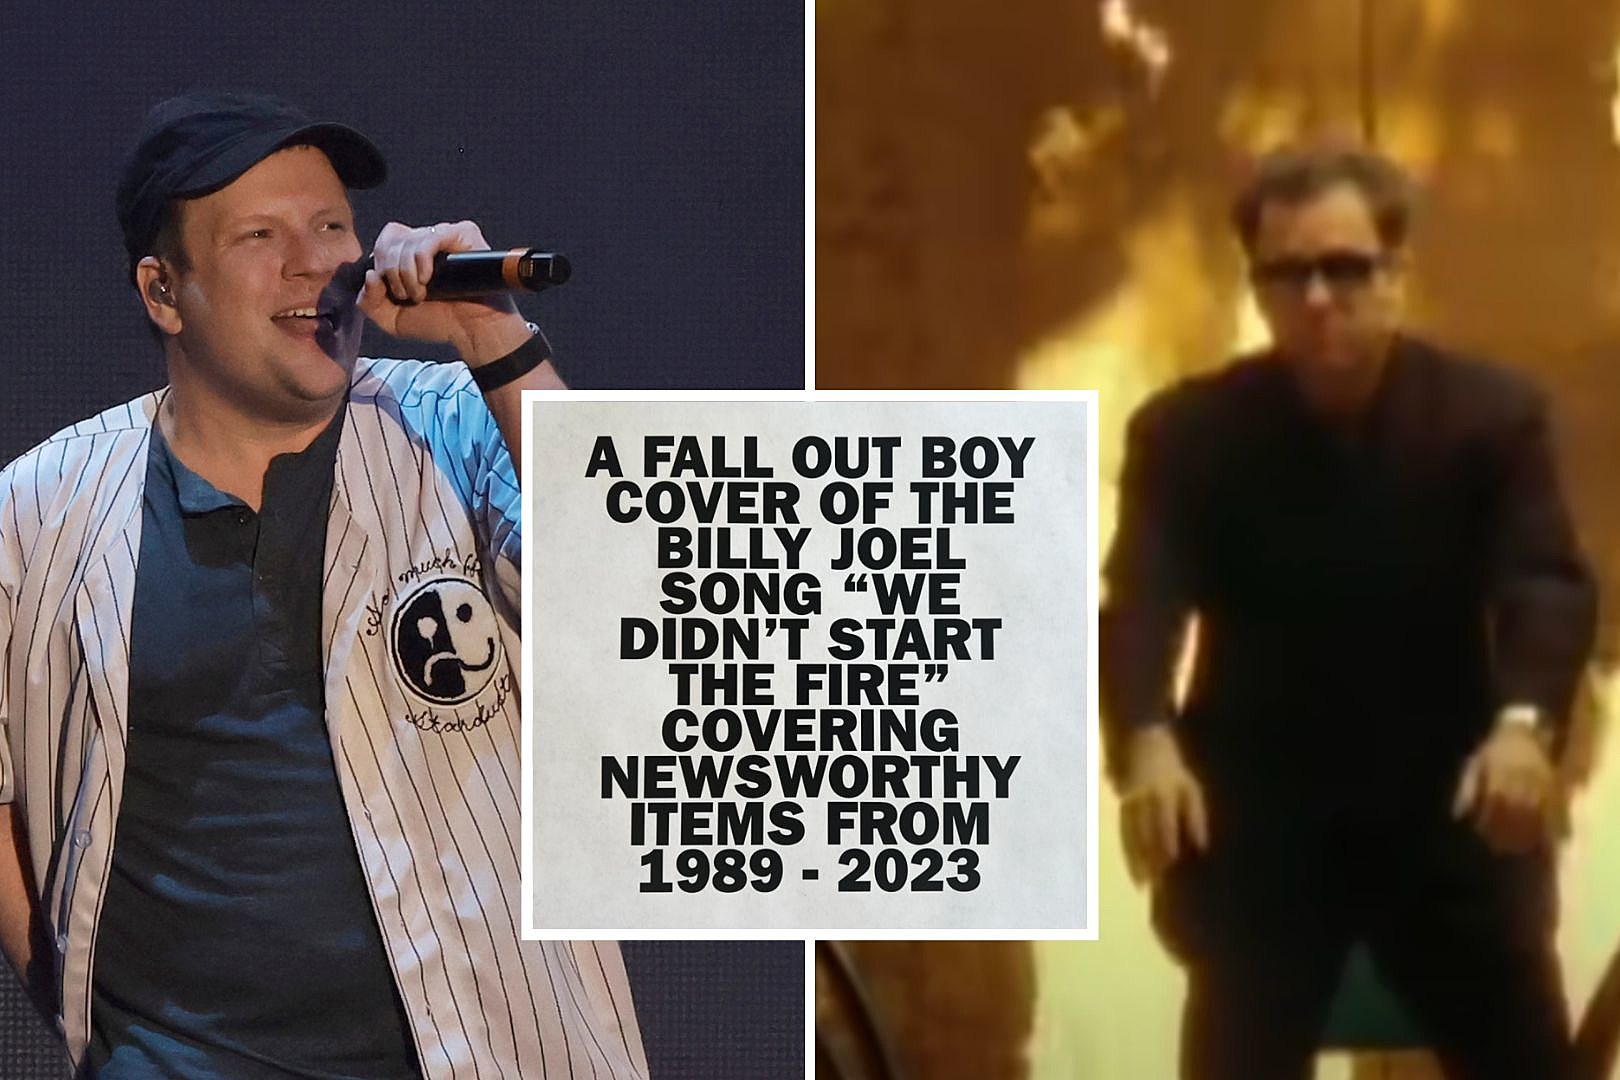 Fall Out Boy slammed for cover of 'We Didn't Start the Fire' - Los